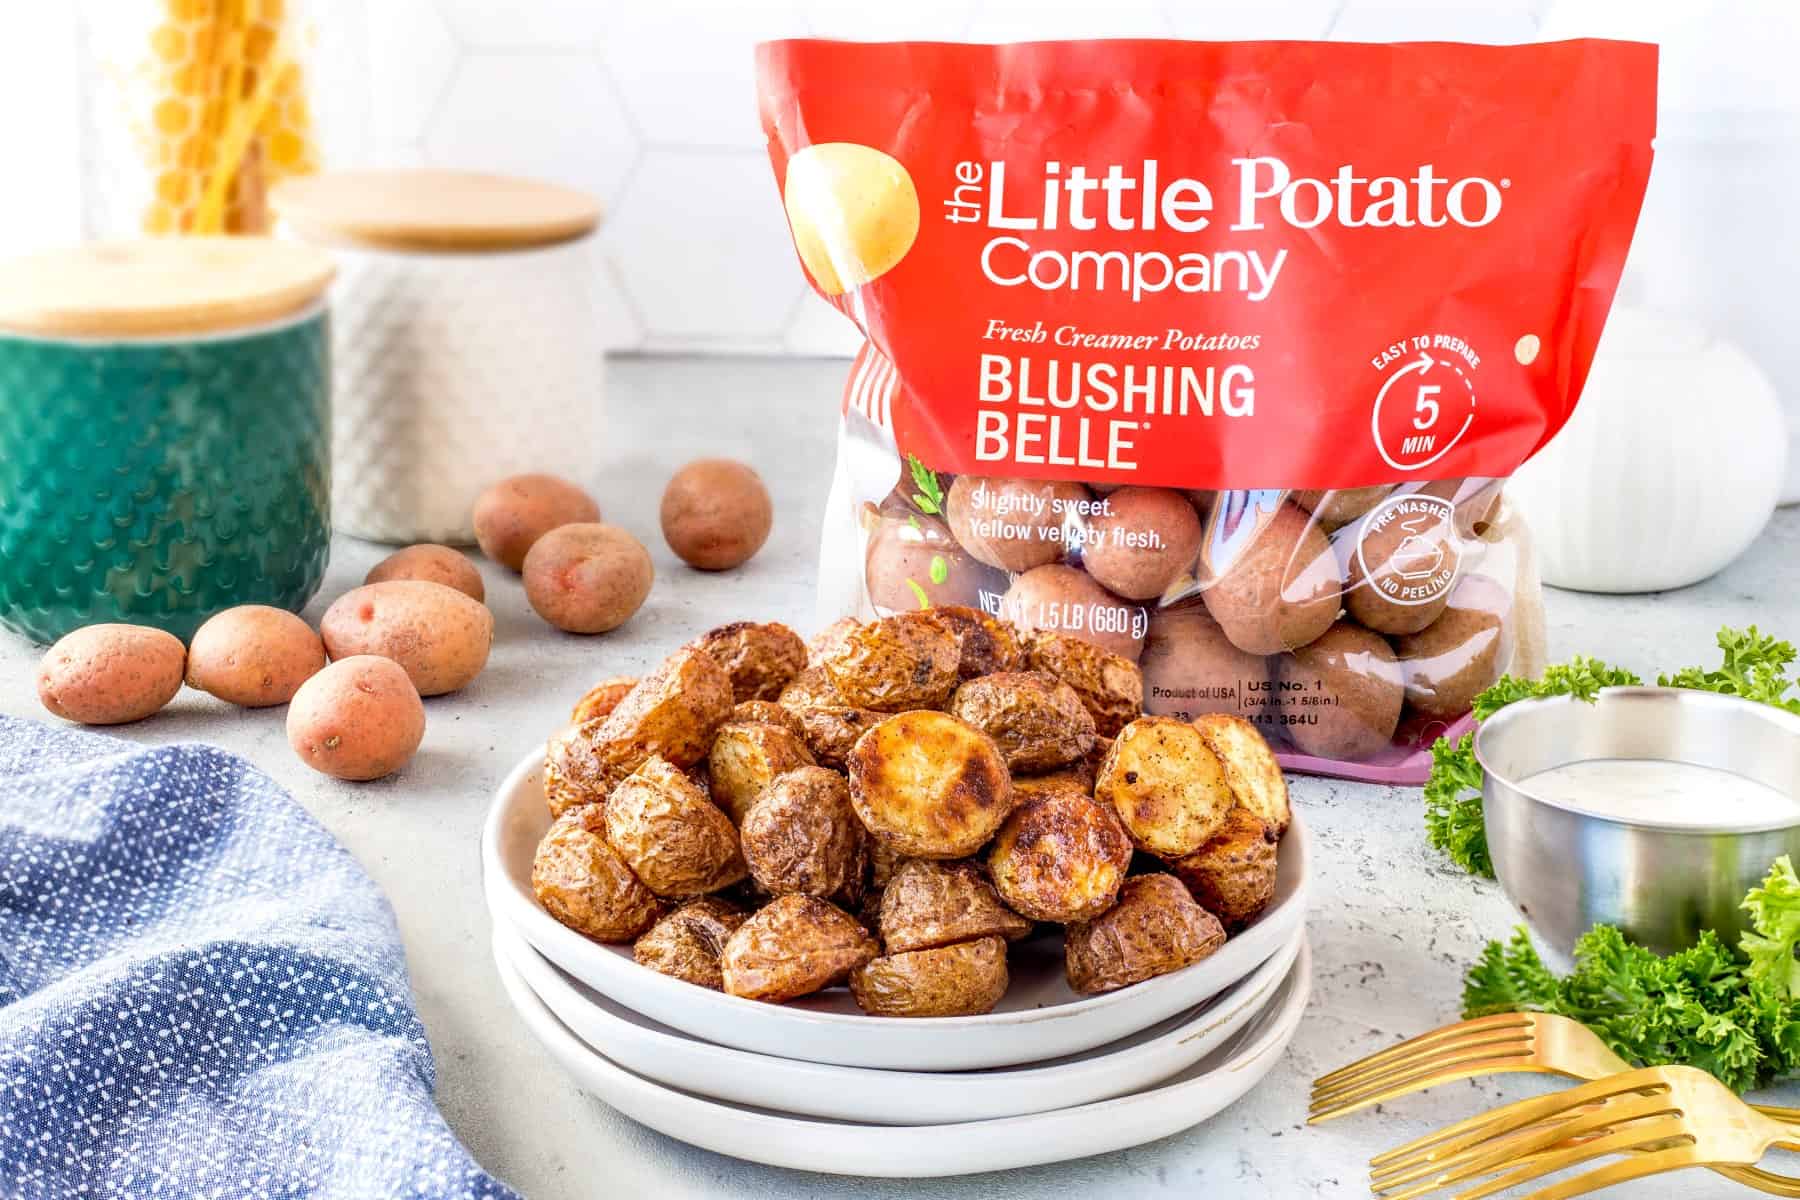 Plateful of potatoes with a bag of Little Potatoes Company in the background